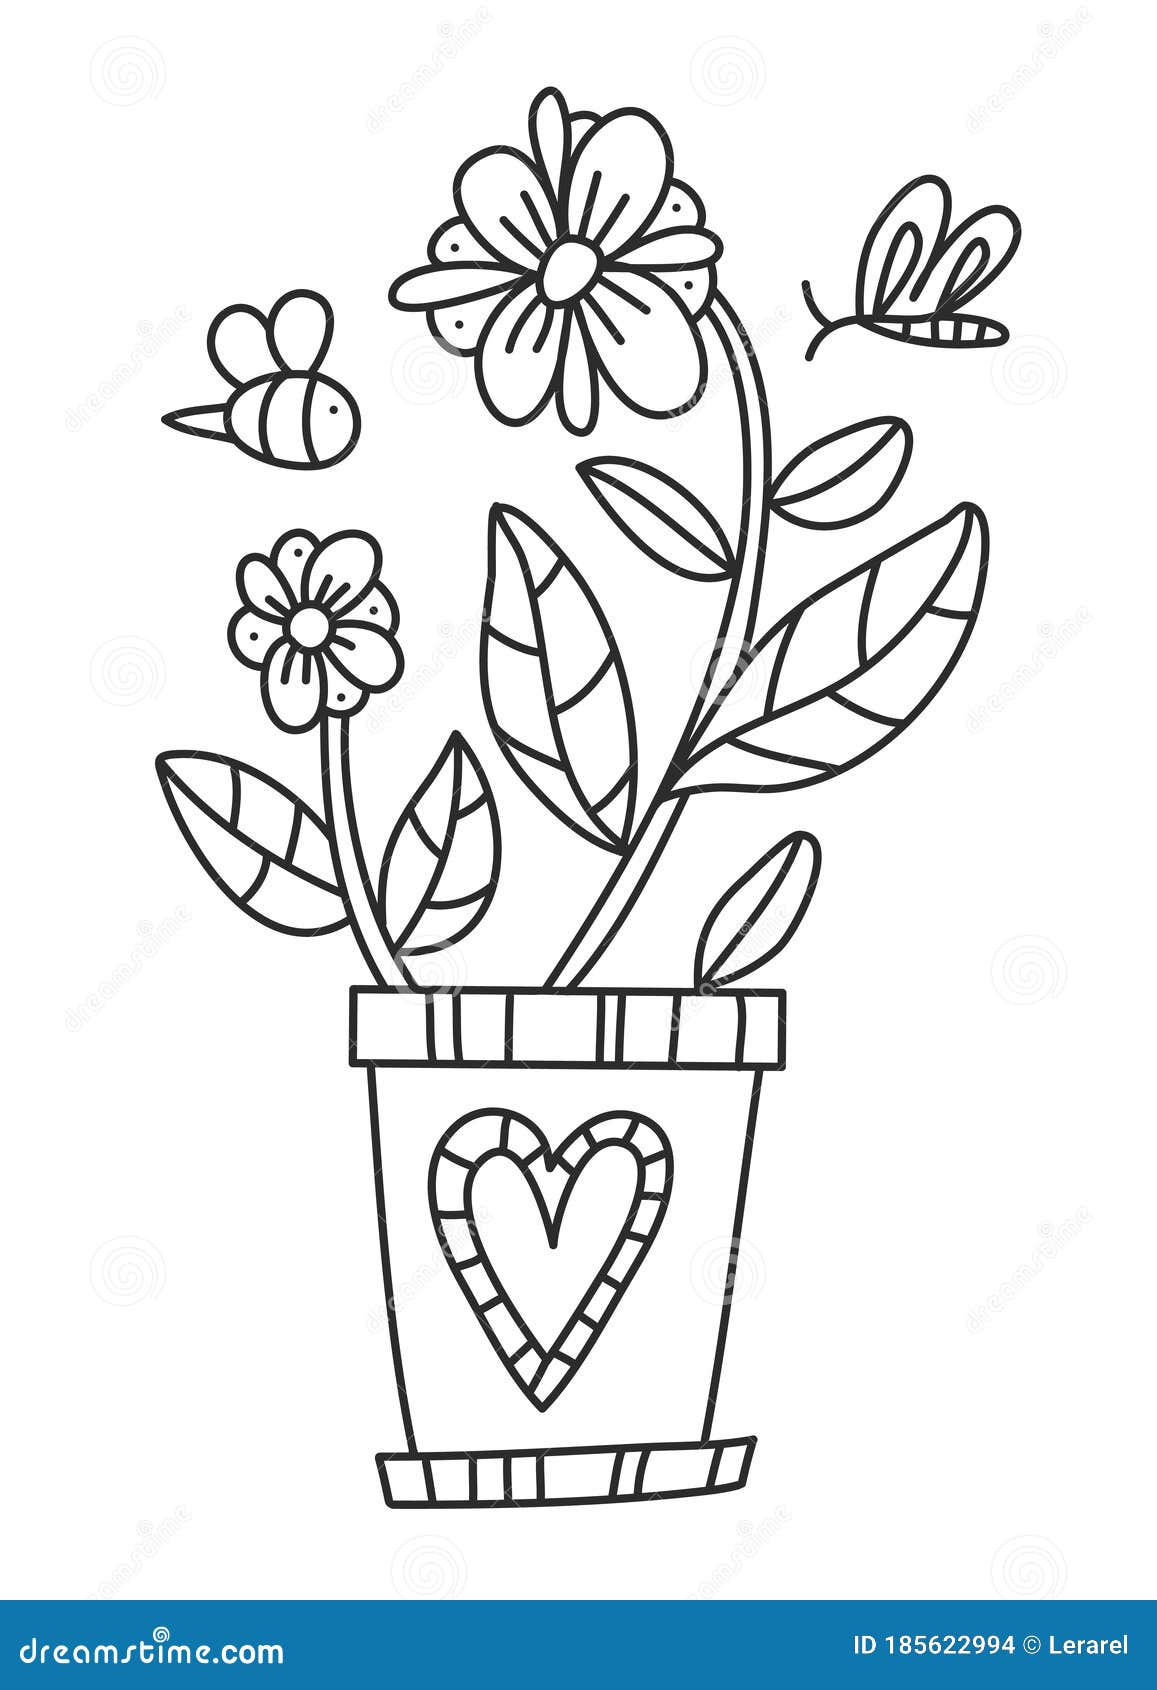 Coloring with Indoor Flowers in a Pot with Insects for Adults and ...